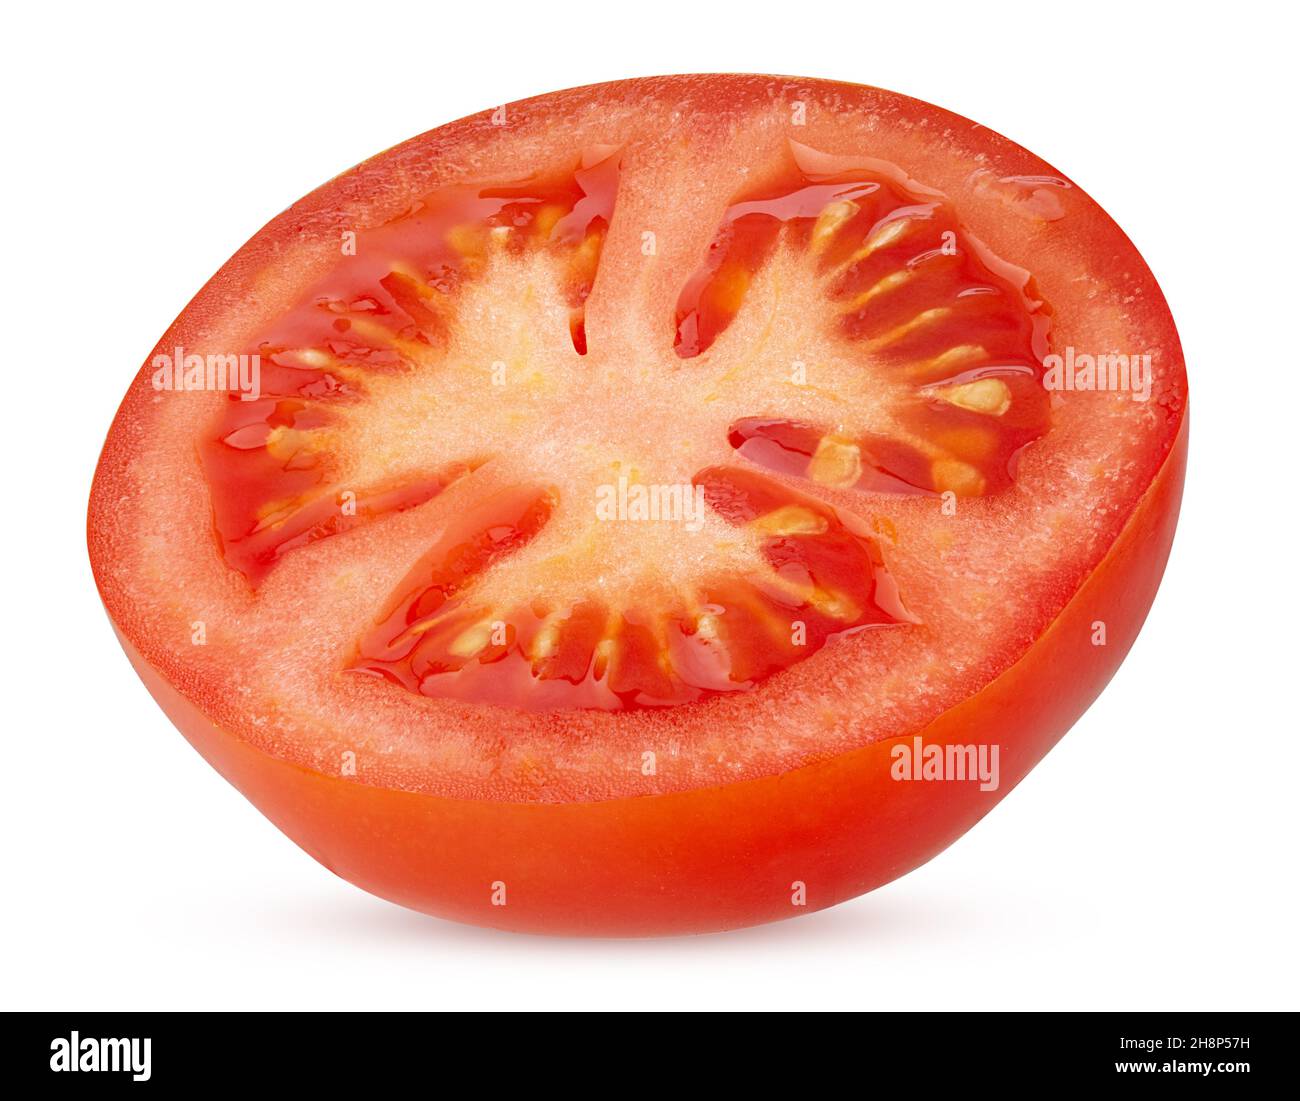 Fresh red tomato cut in half isolated on white background Clipping Path. Full depth of field. Stock Photo